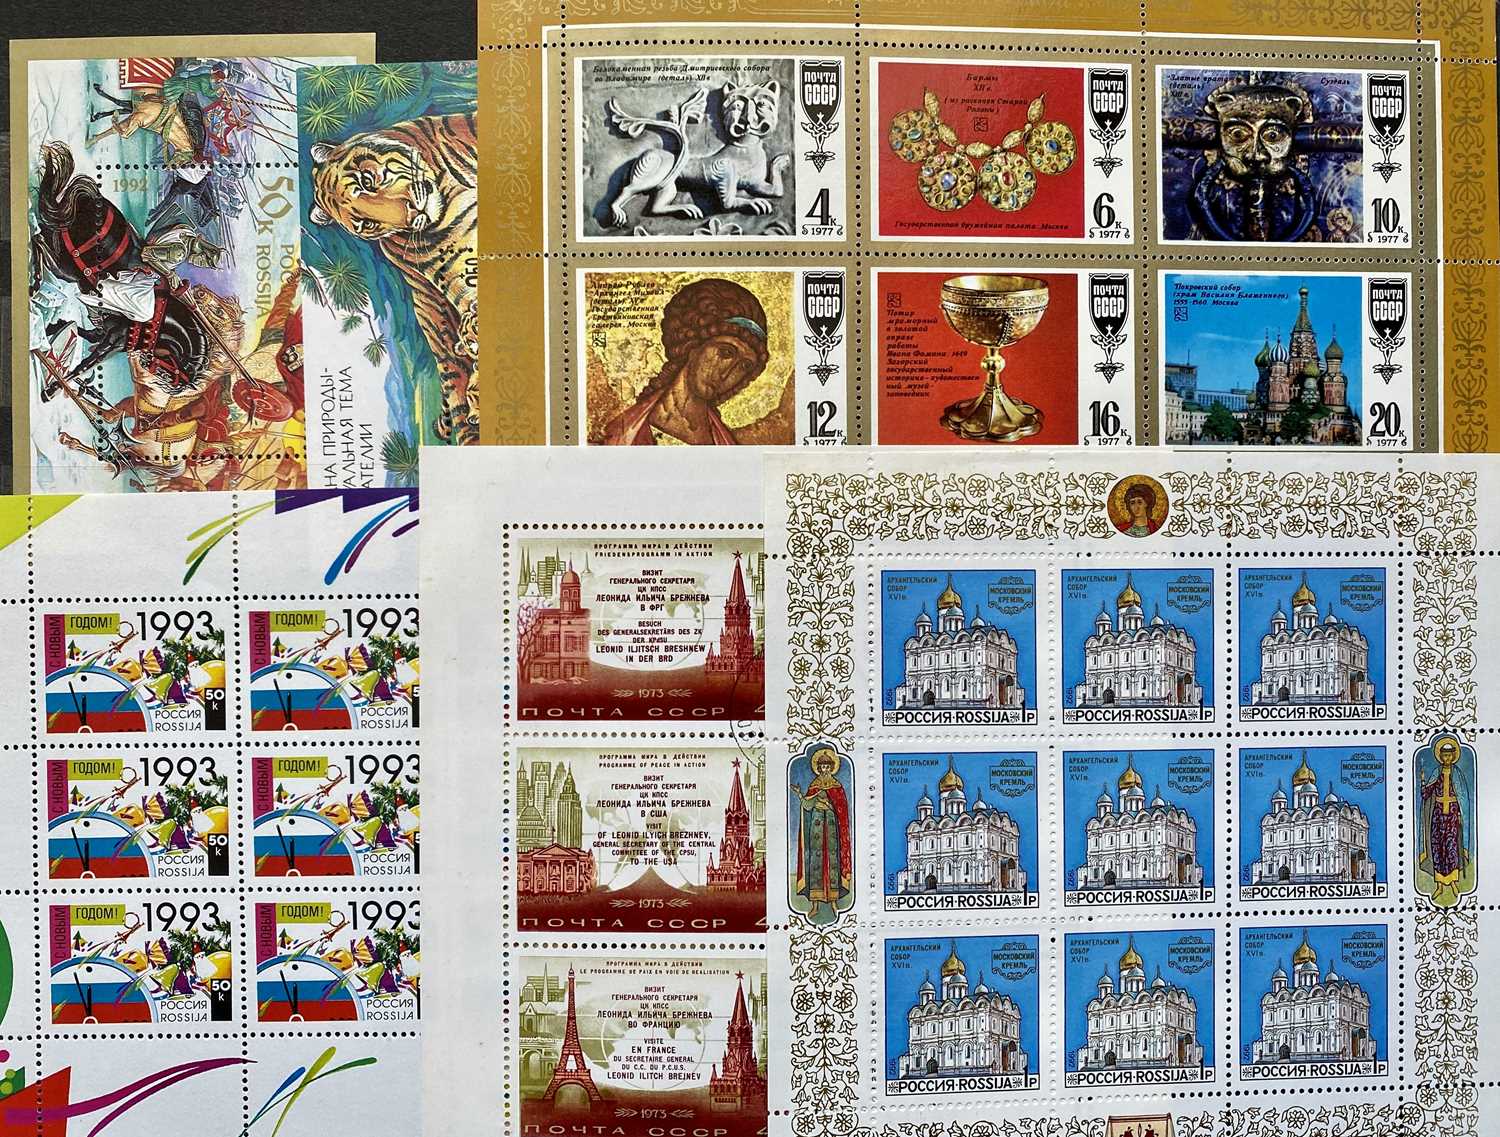 OFFERED WITH LOT 42 - MAINLY UNMOUNTED MINT RUSSIAN MINI SHEETS plus approx 20 fine used mini